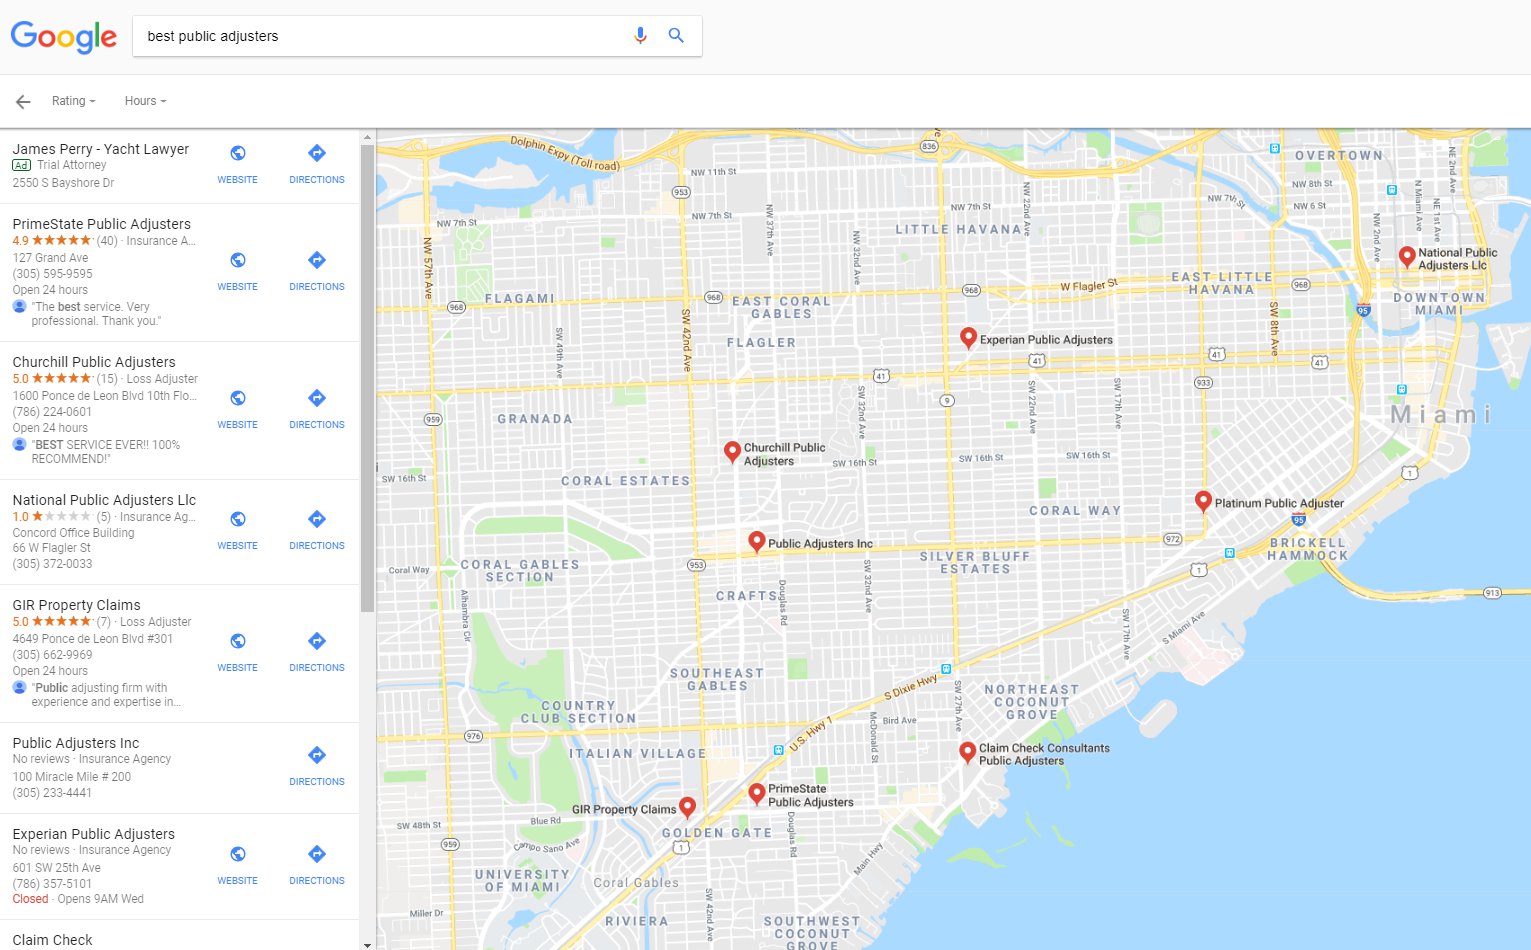 a google map of the best public adjusters in Miami, FL